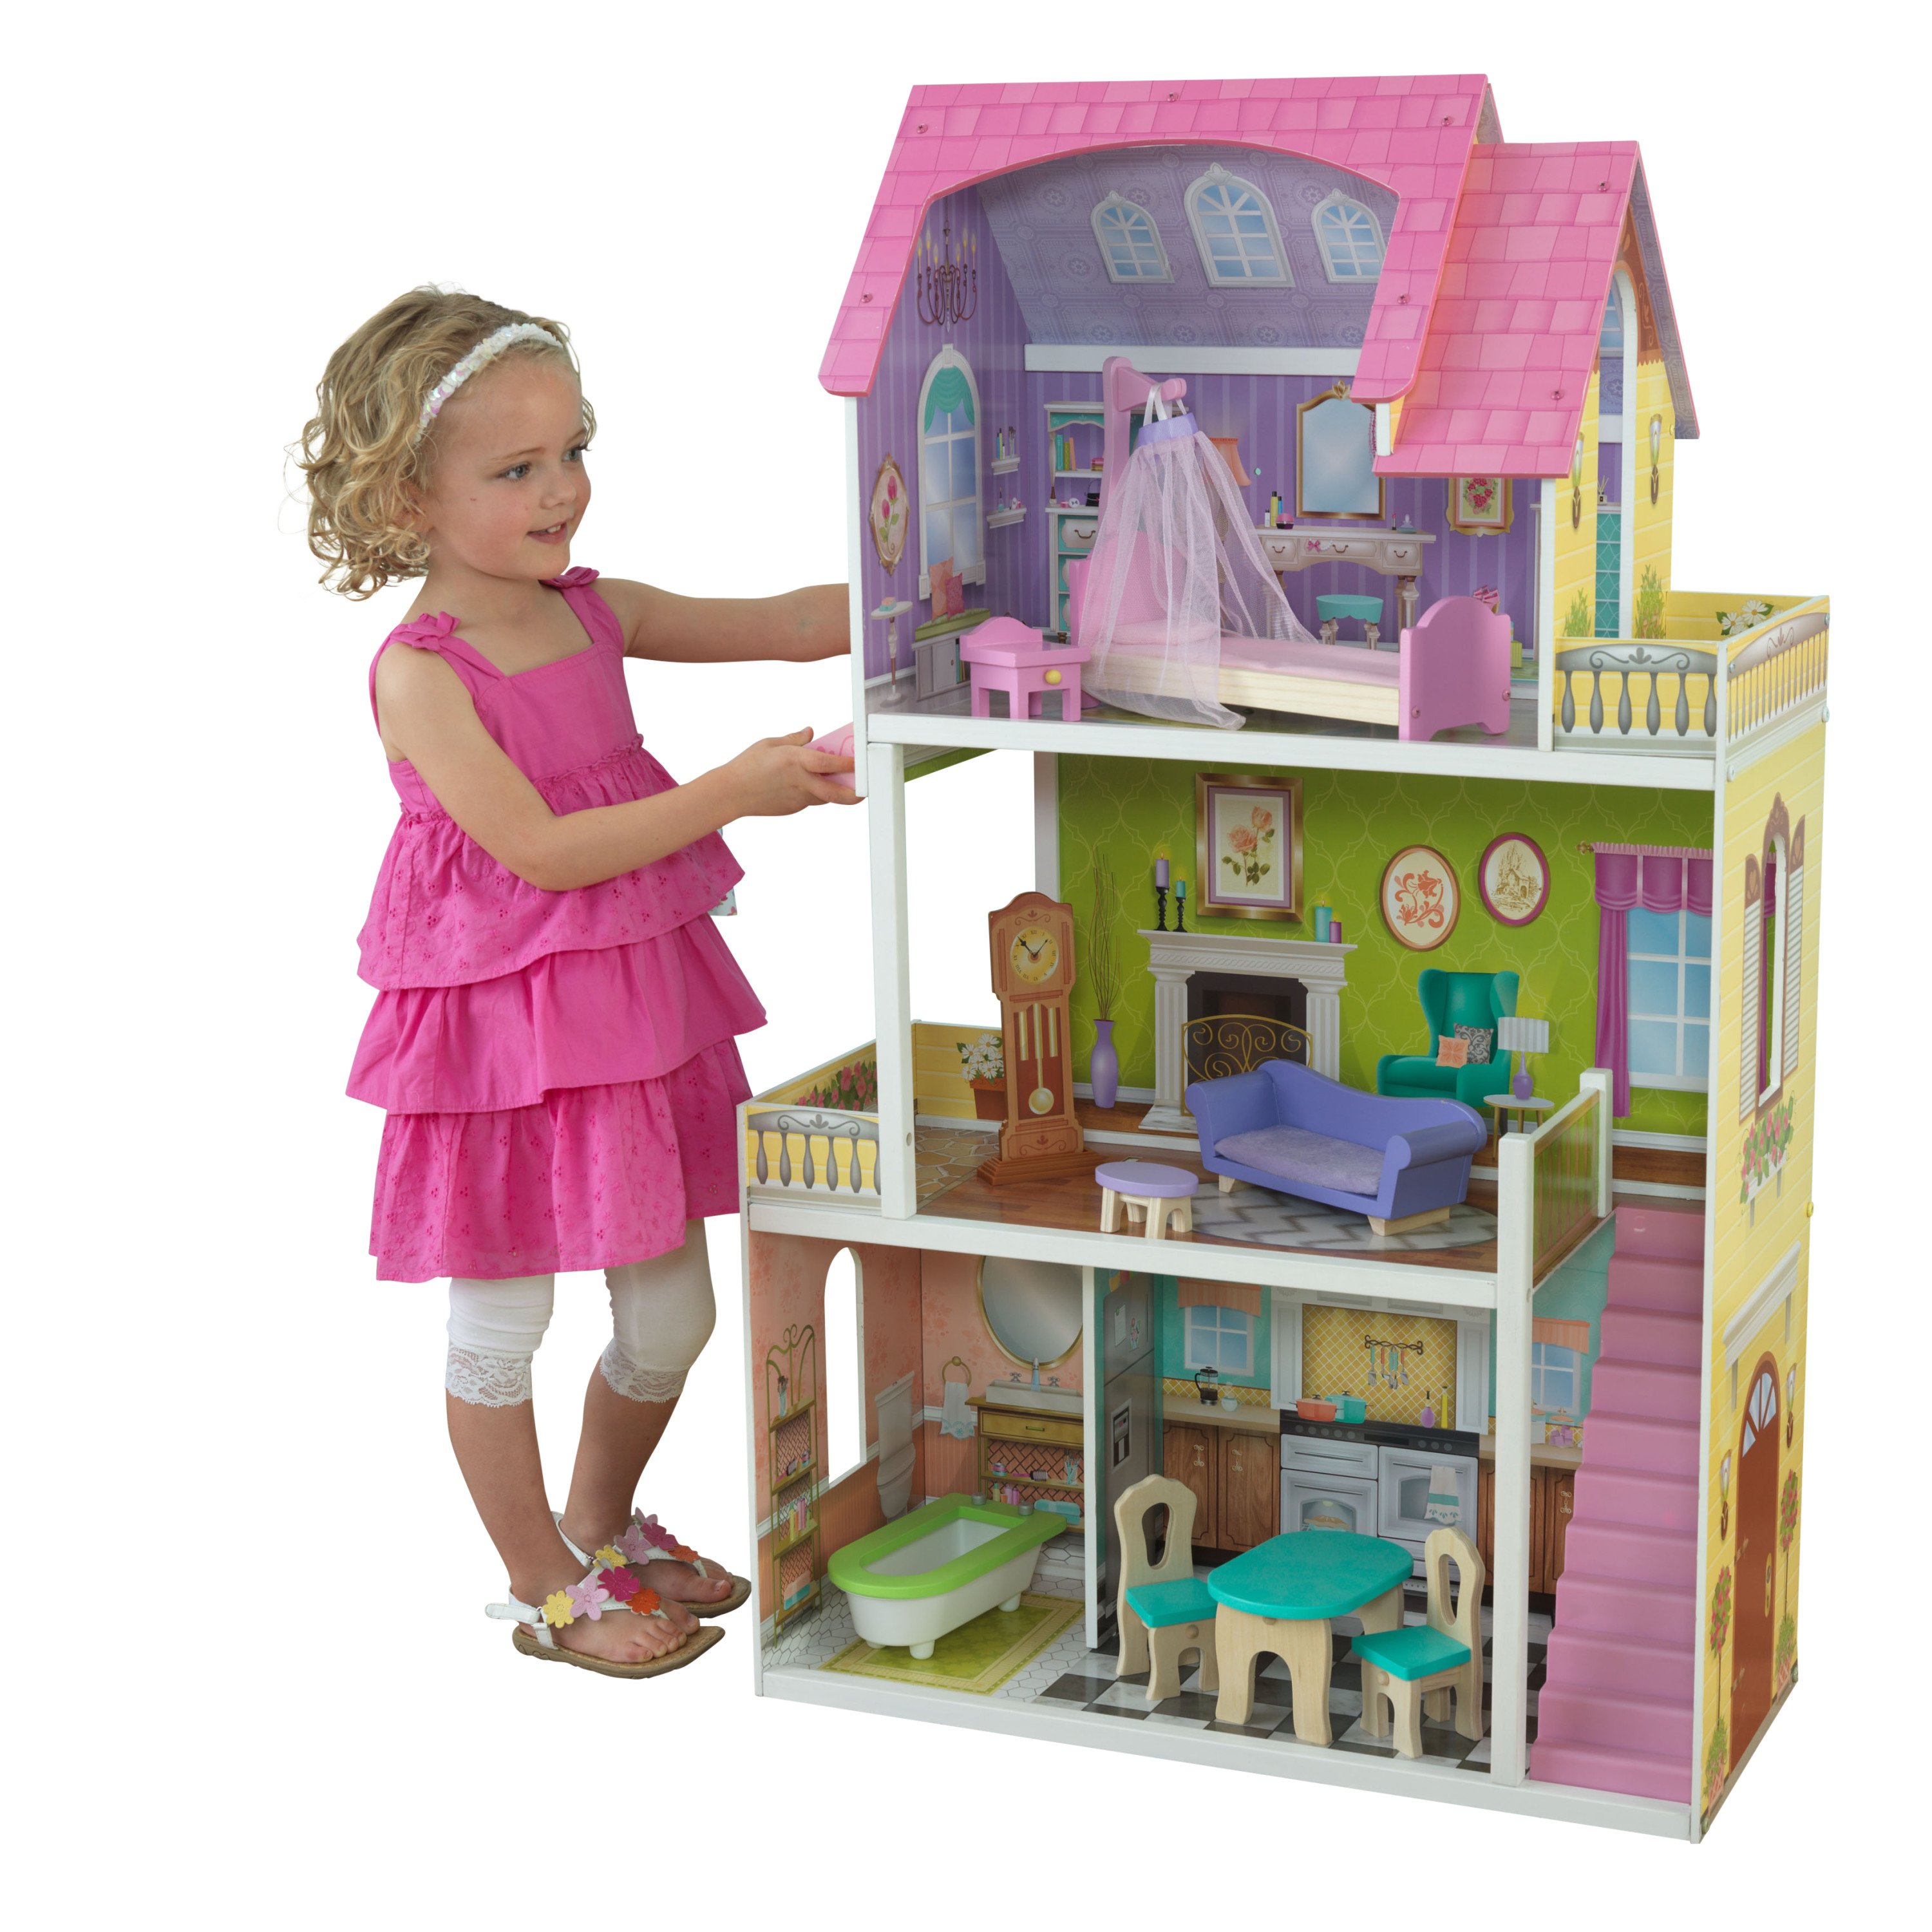 KidKraft Dollhouses: Florence, Charlotte Classic, or My Dreamy Dollhouse w/ Lights & Sounds $69 + Free Shipping